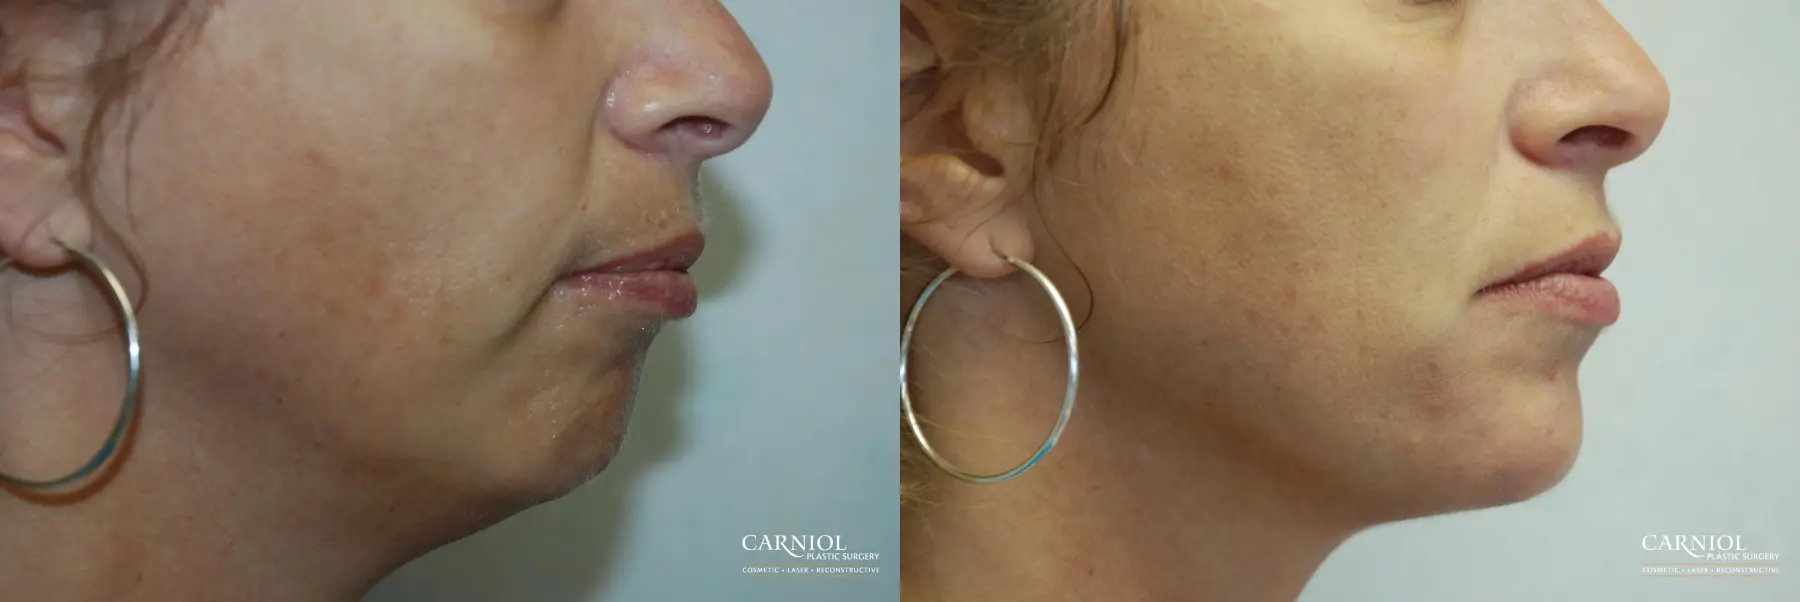 Non-Surgical Facelift: Patient 5 - Before and After  